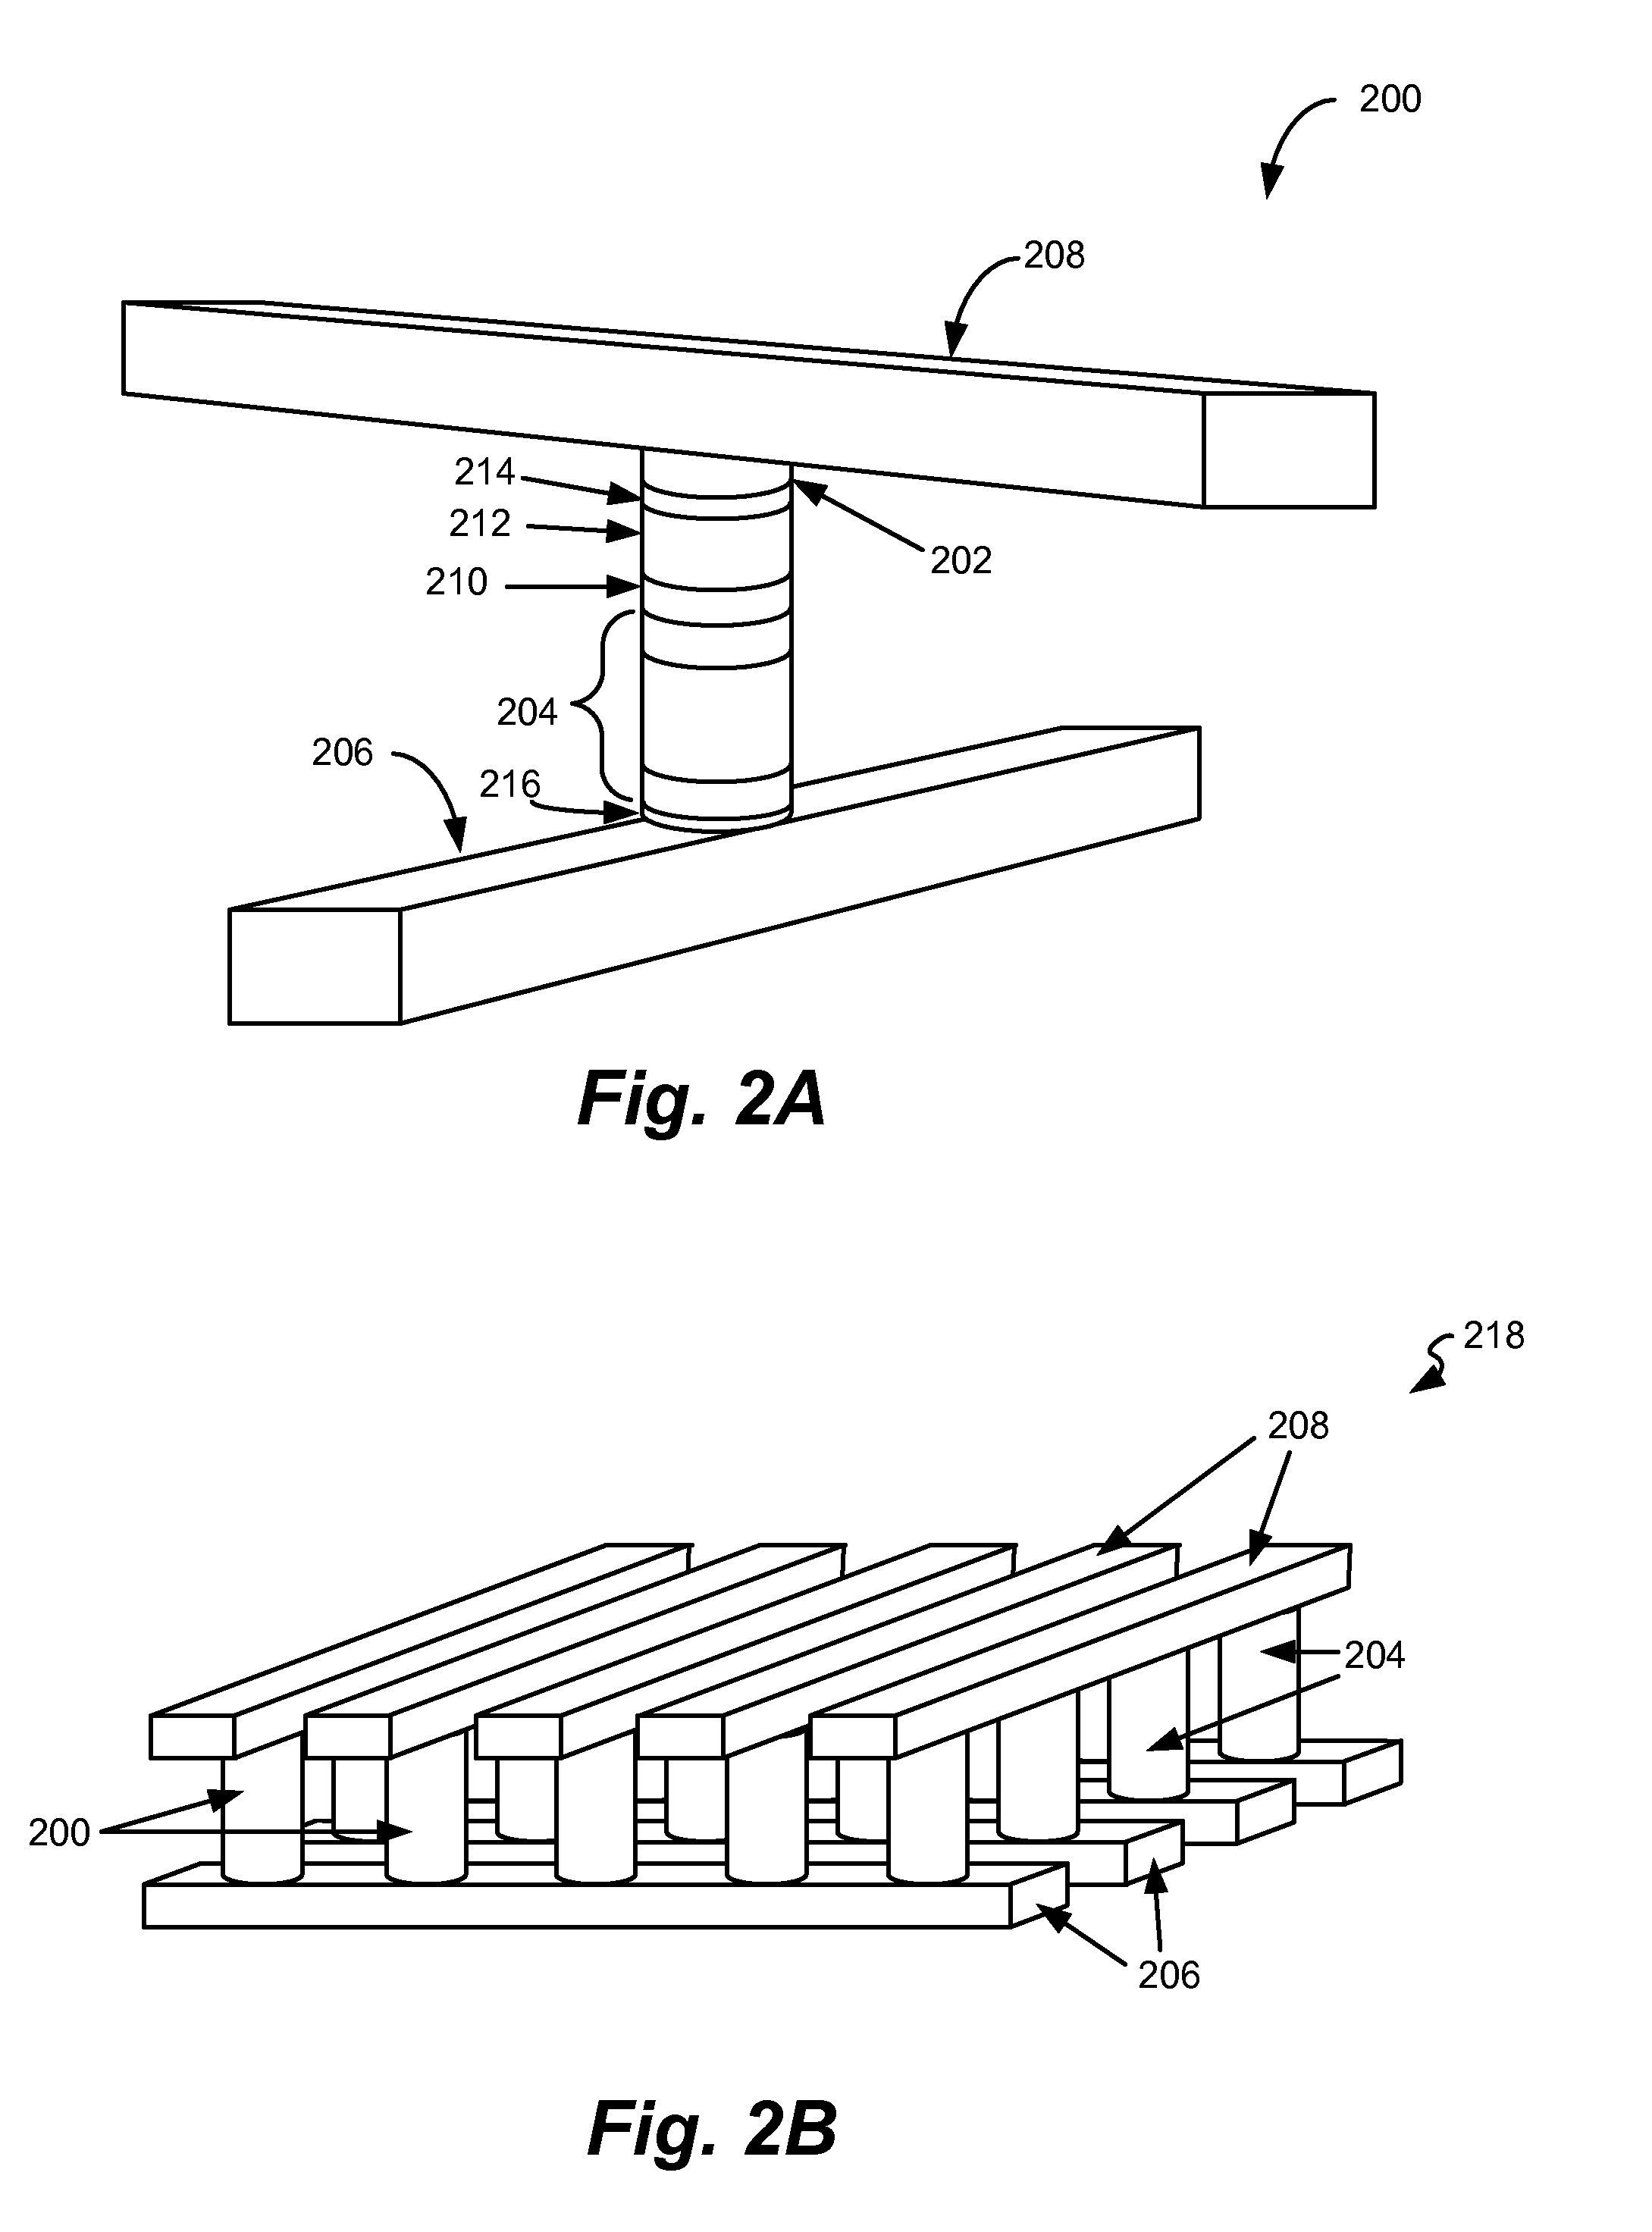 Memory cell that employs a selectively fabricated carbon nano-tube reversible resistance-switching element and methods of forming the same